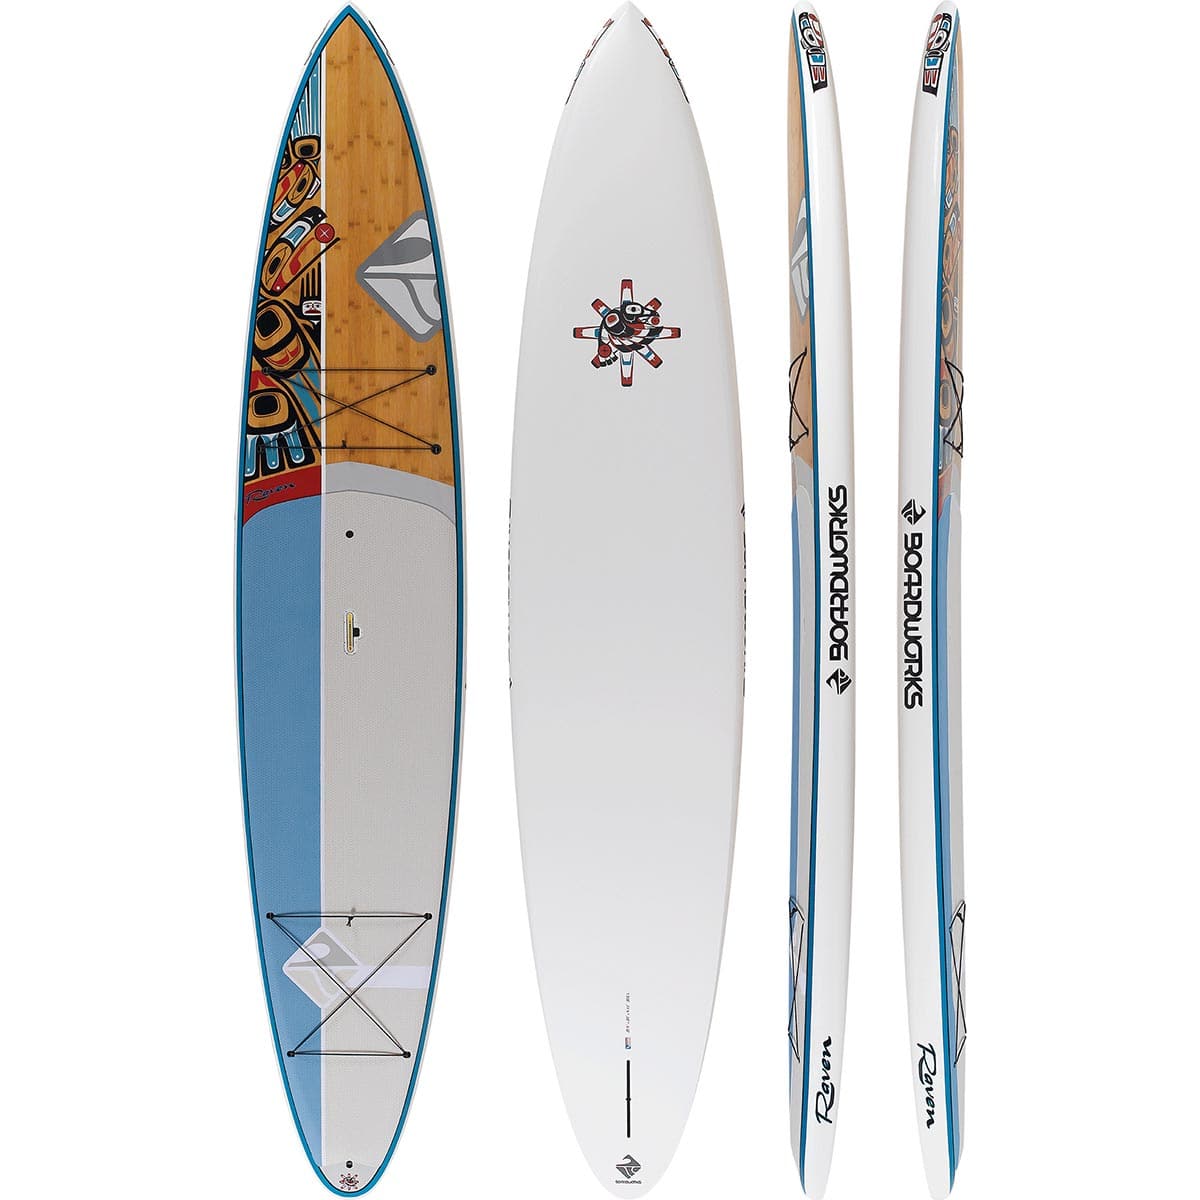 Featuring the Raven 12'6 rigid sup manufactured by Boardworks shown here from a second angle.